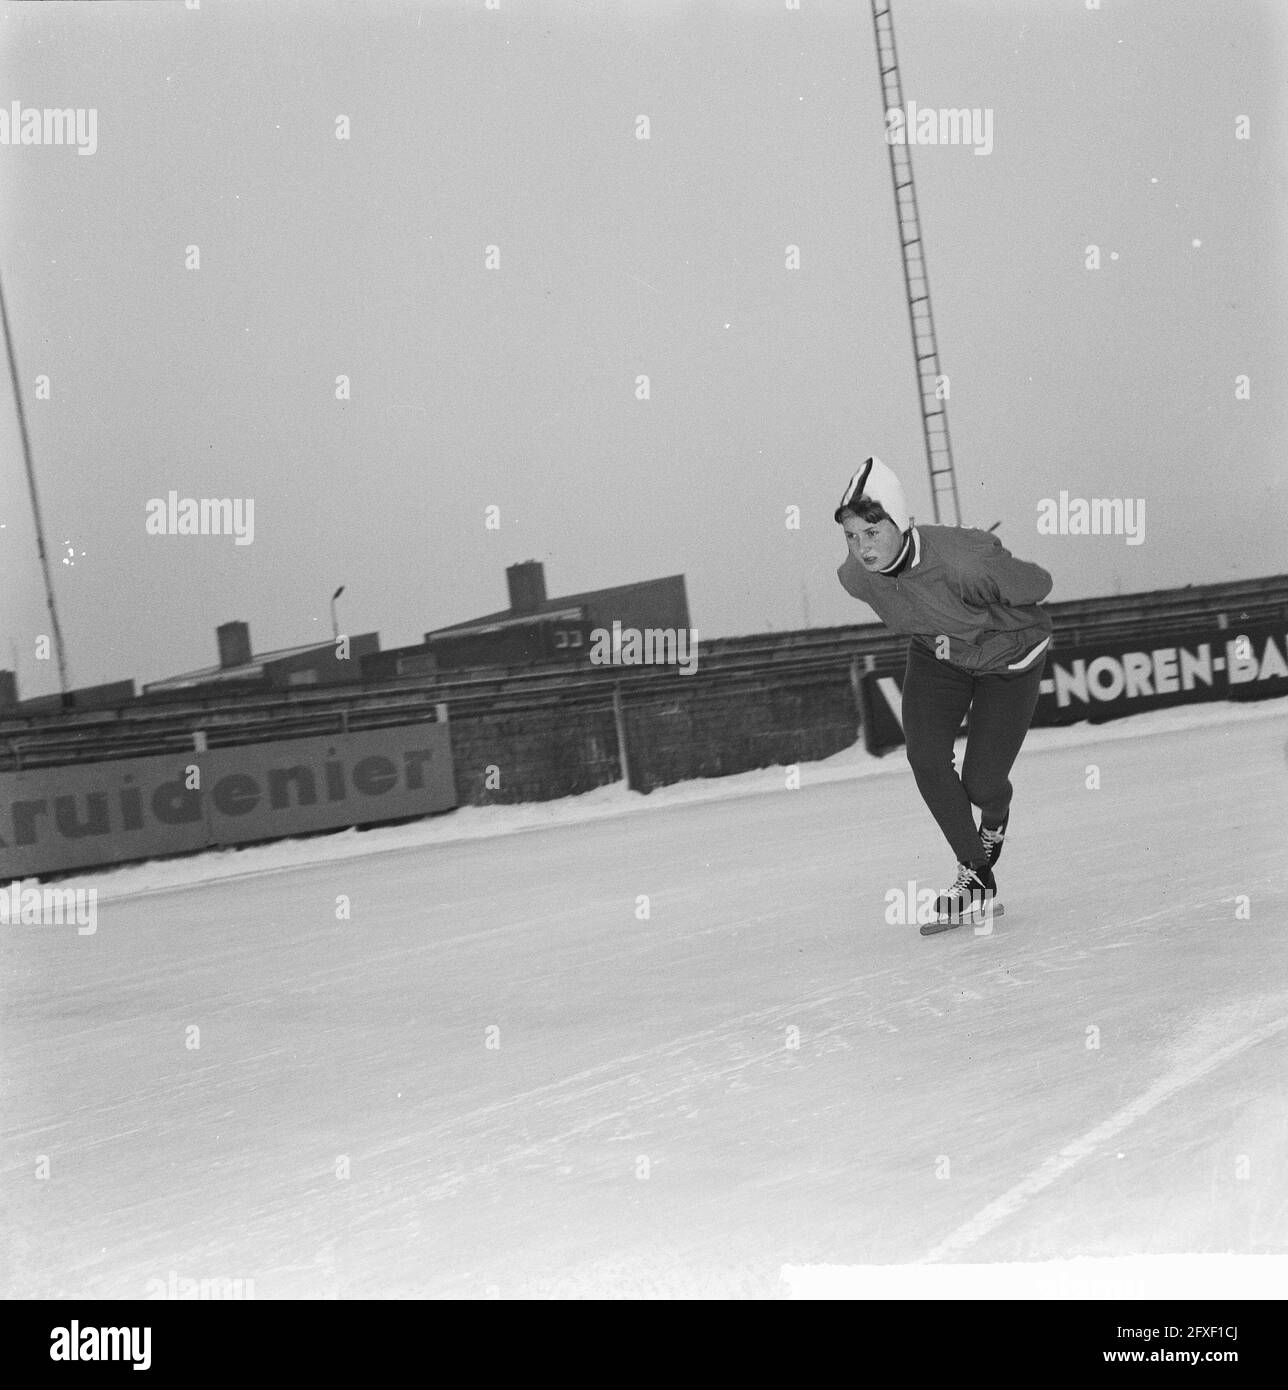 Training Dutch core team on Deventer artificial ice rink. Willy de Beer, December 12, 1963, skating, sports, The Netherlands, 20th century press agency photo, news to remember, documentary, historic photography 1945-1990, visual stories, human history of the Twentieth Century, capturing moments in time Stock Photo